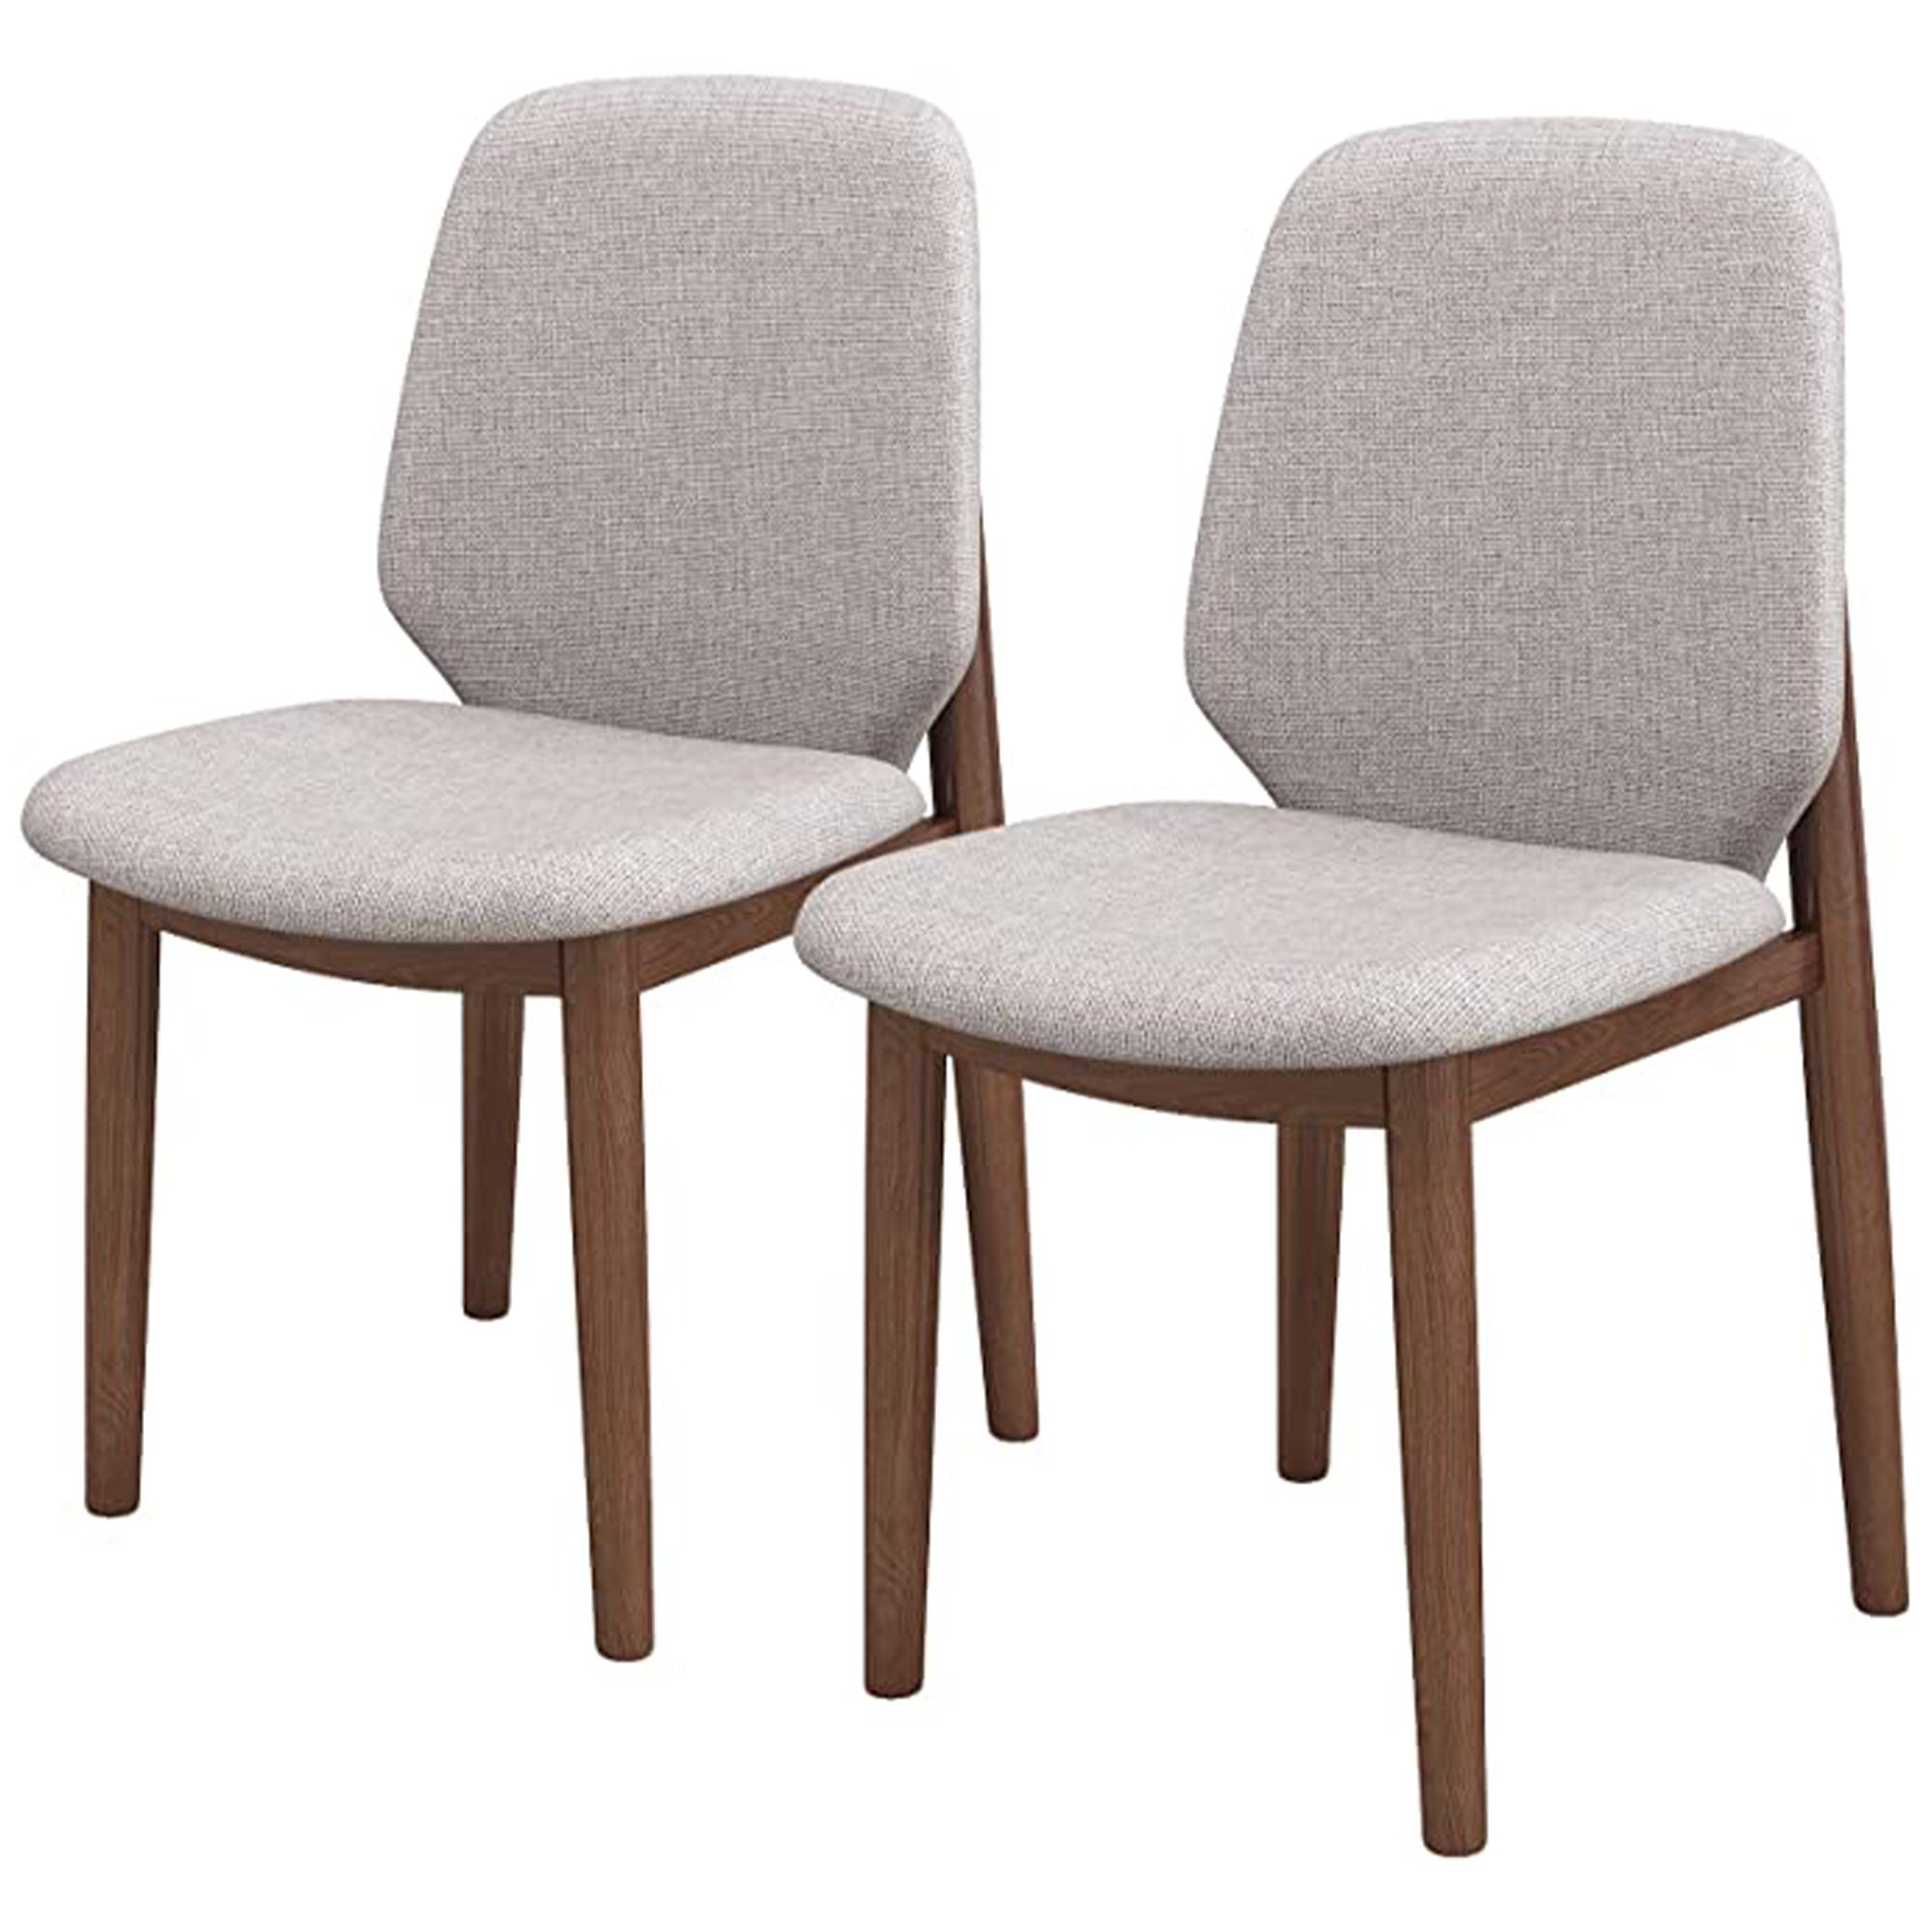 Full Double Pad Wooden Dining Chair